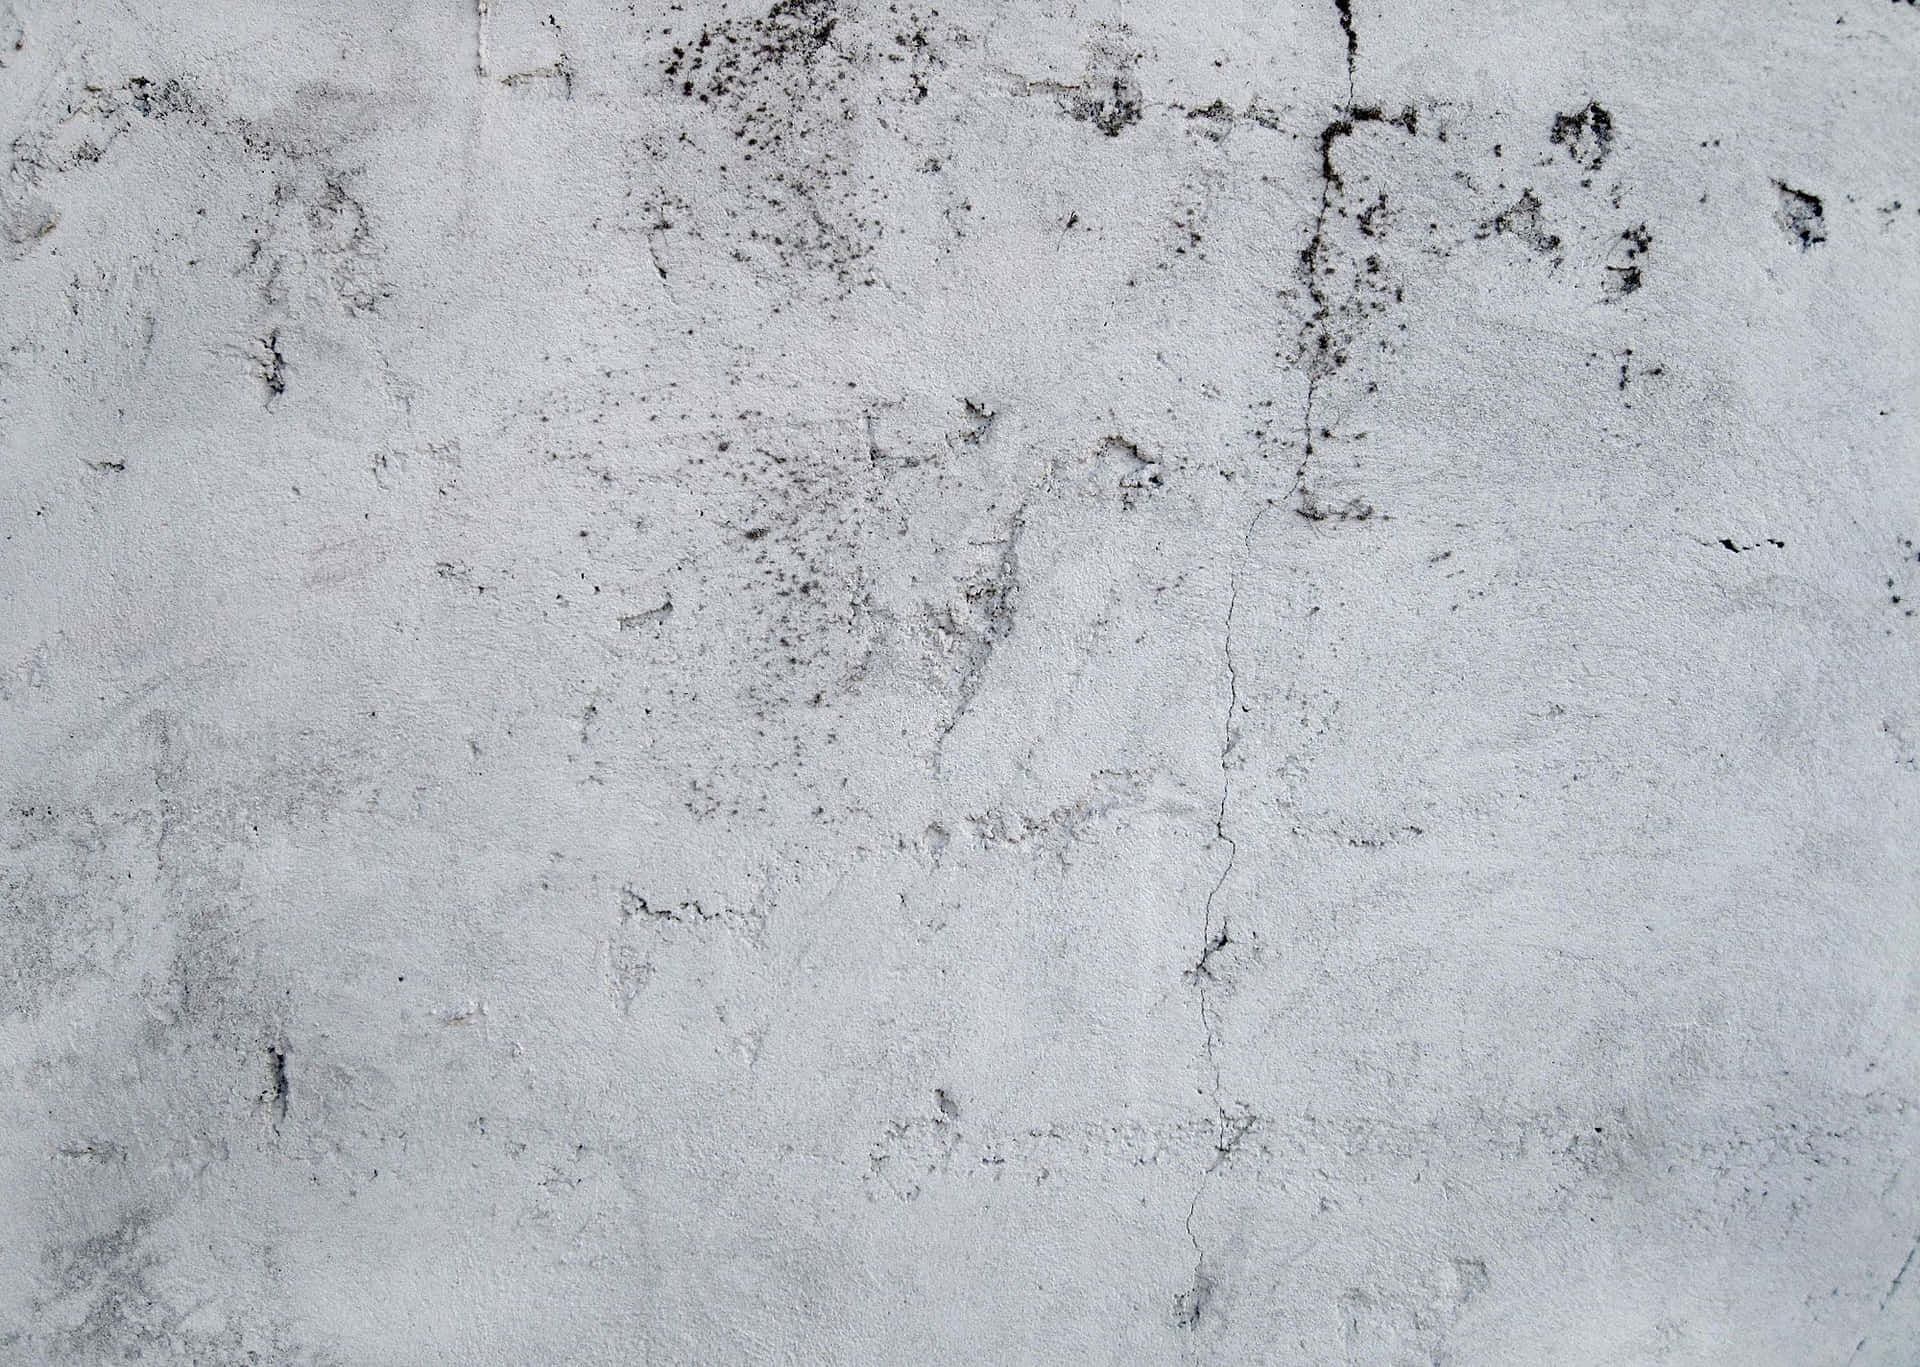 Grunge Texture Pictures